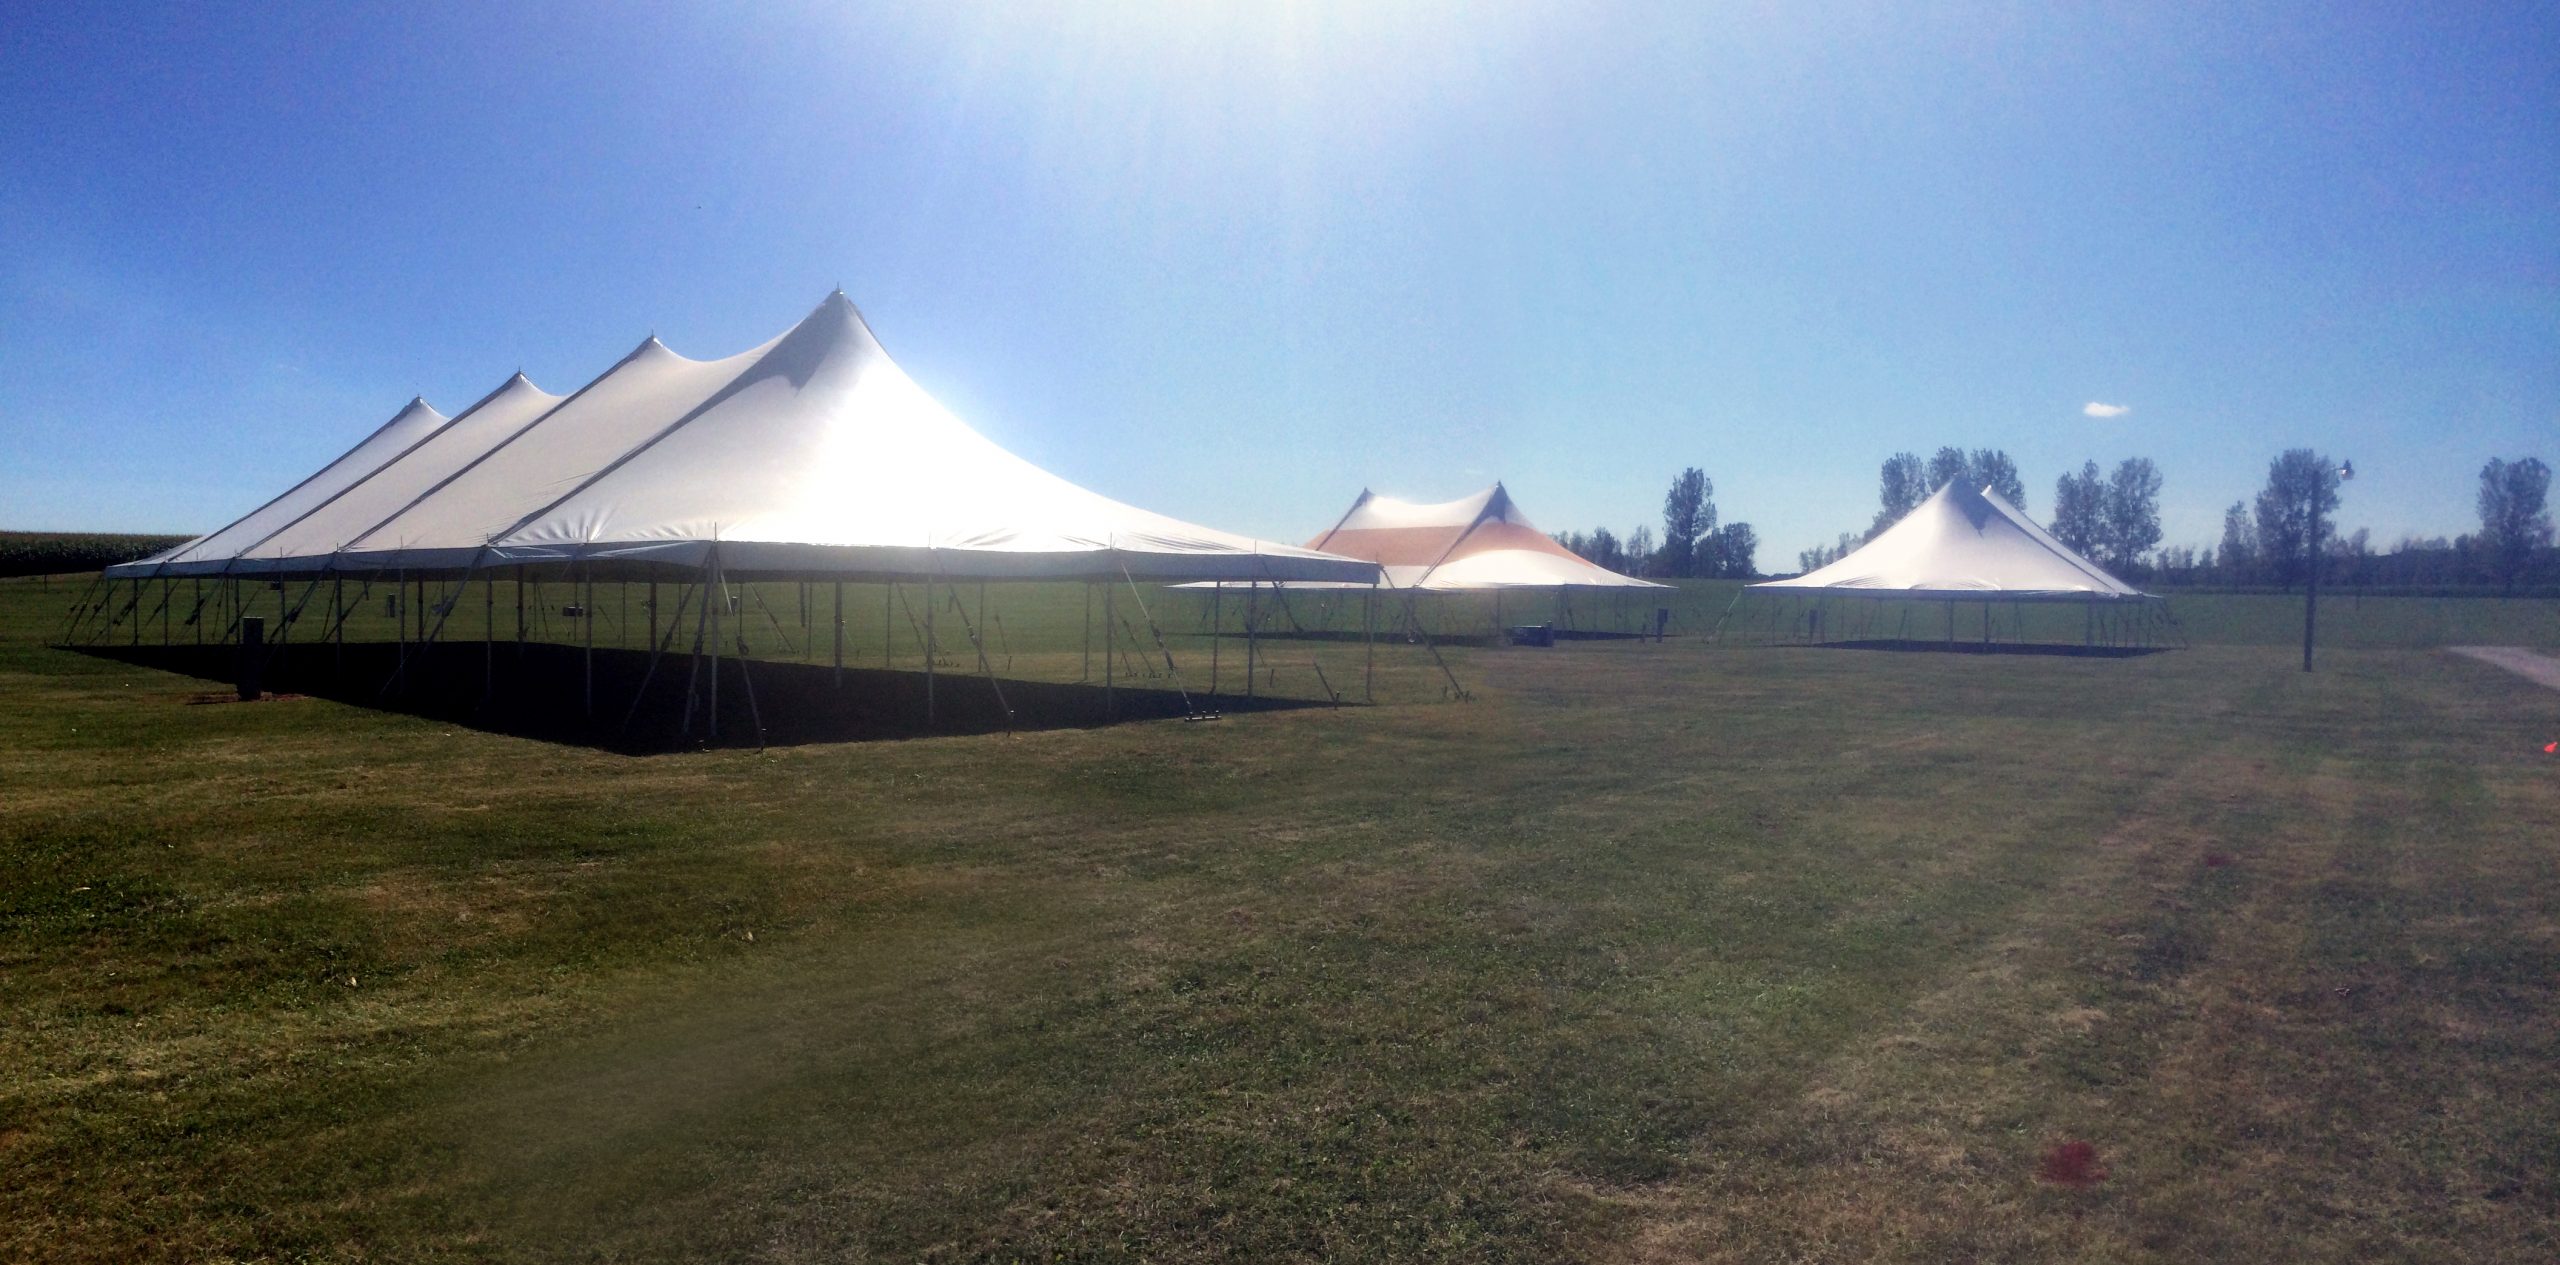 Tents for Cedar Rapids Kennel Association in the Amana Colonies in Iowa